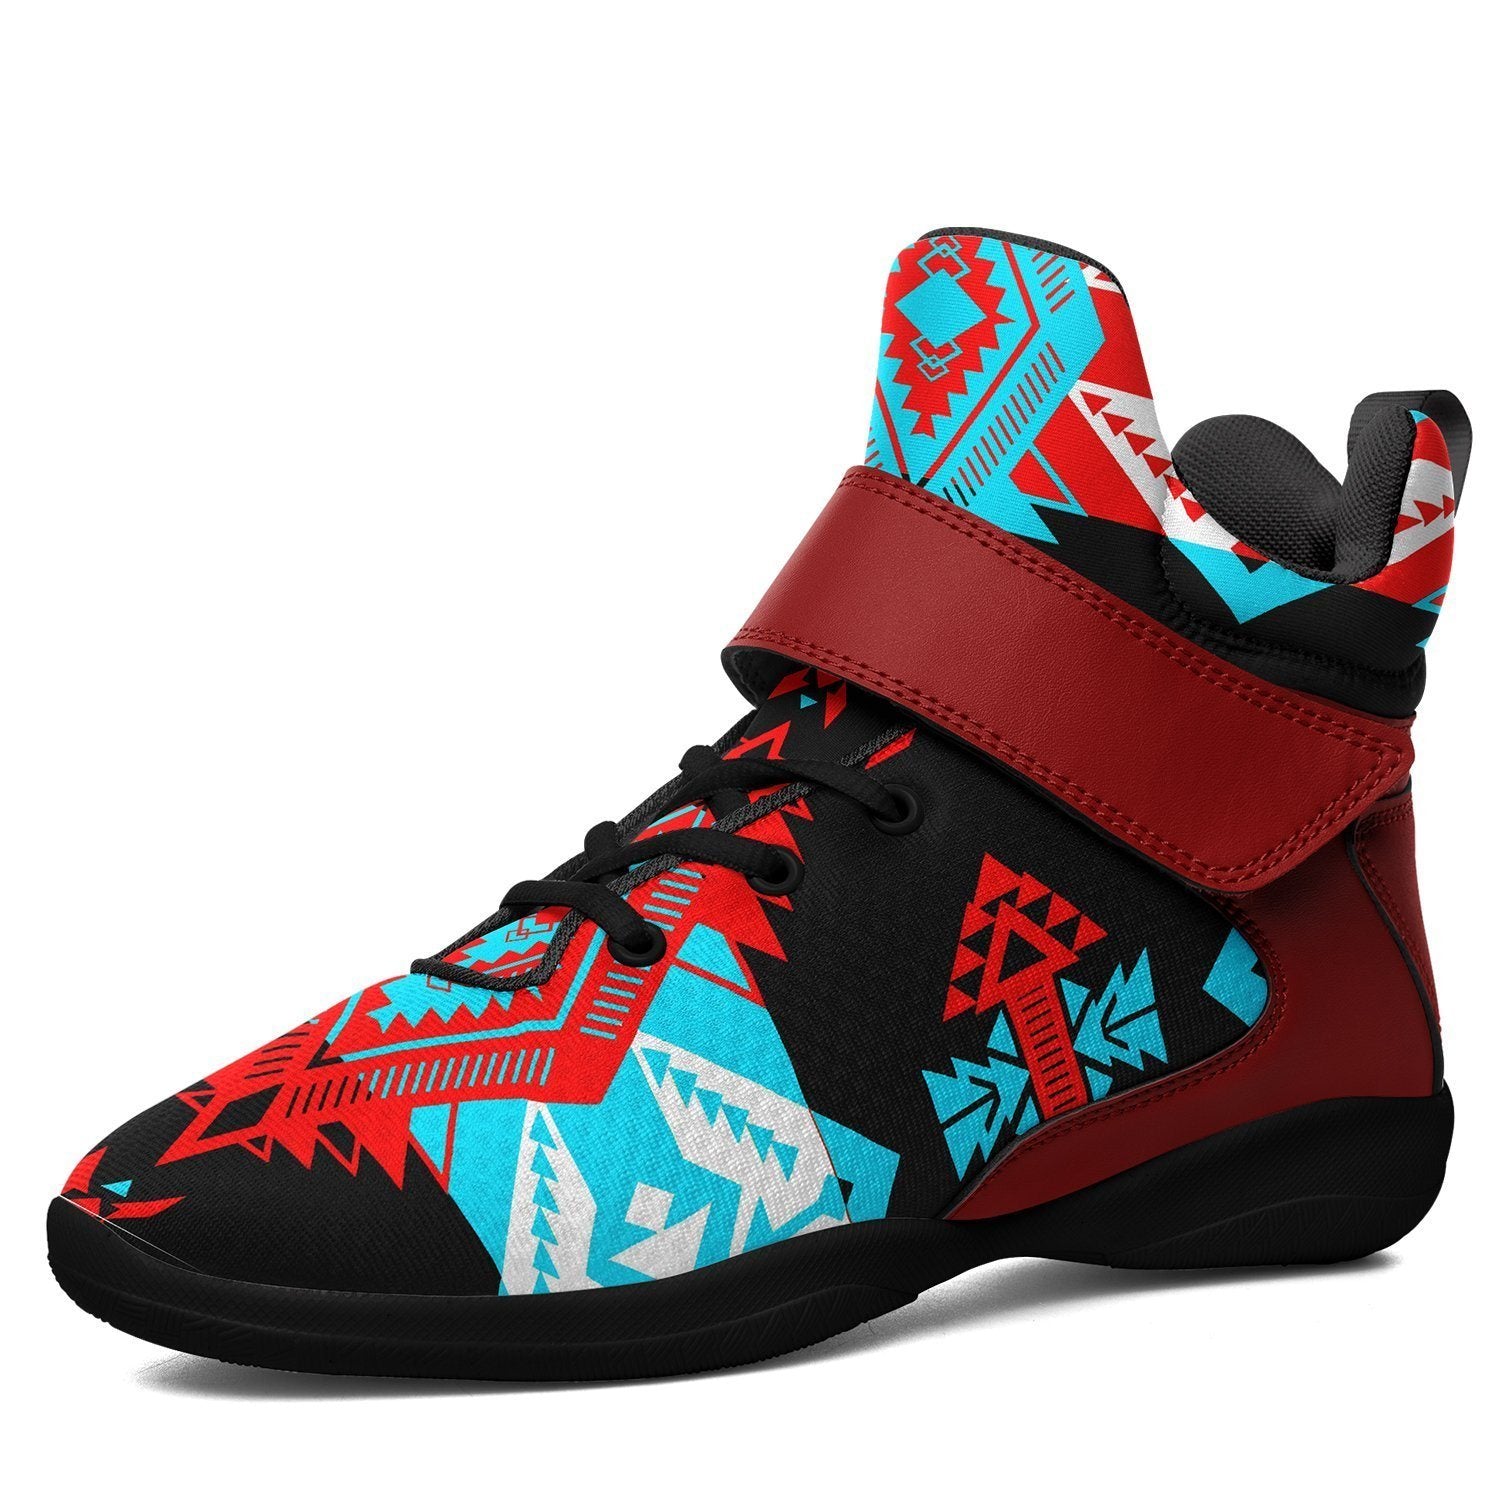 Sovereign Nation Trade Ipottaa Basketball / Sport High Top Shoes - Black Sole 49 Dzine US Men 7 / EUR 40 Black Sole with Dark Red Strap 